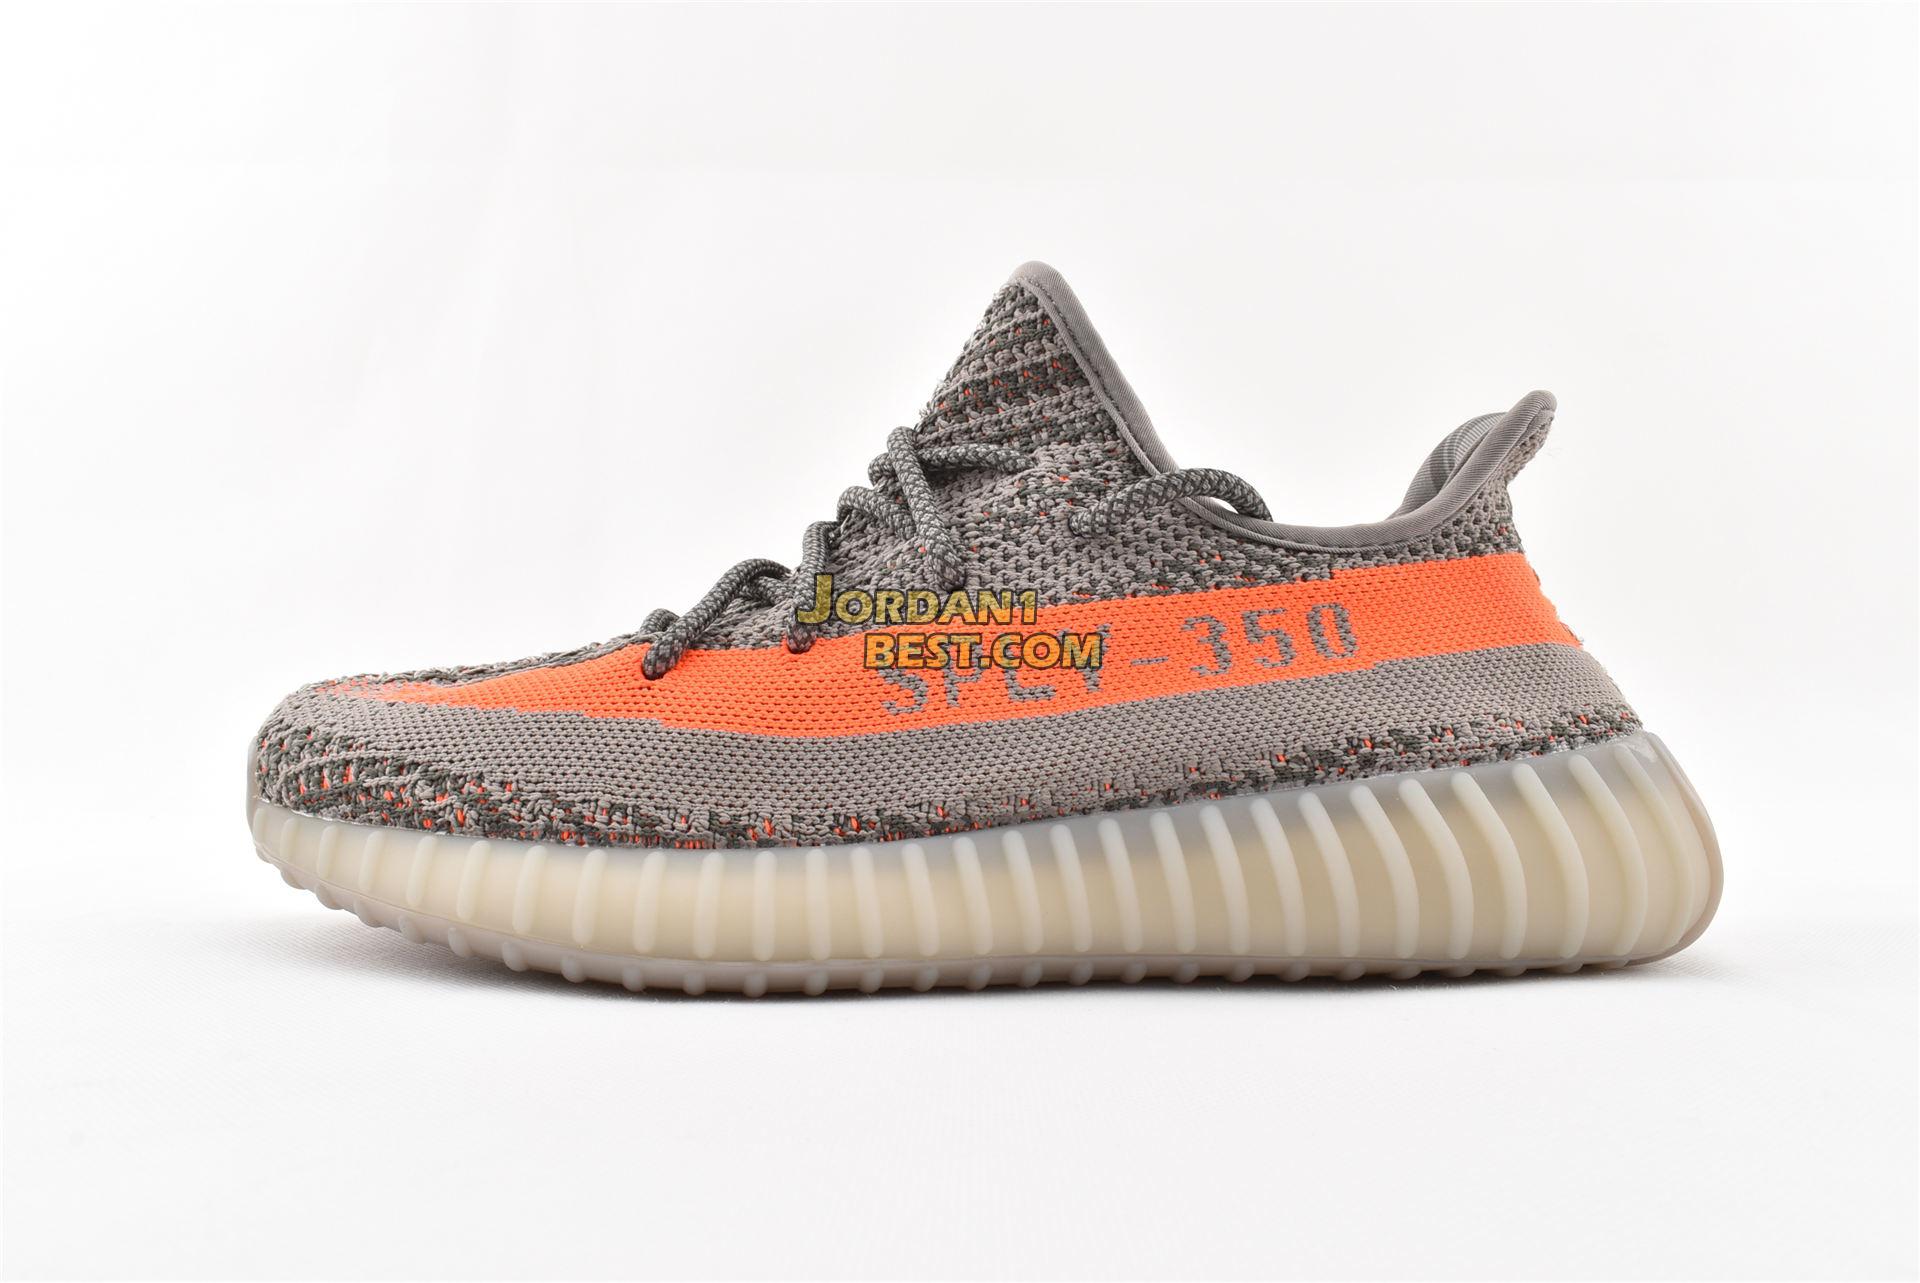 AAA Quality Adidas Yeezy Boost 350 V2 "Beluga" BB1826 Steel Grey/Beluga-Solar Red Mens Womens Unisex Shoes replicas On Sale Wholesale